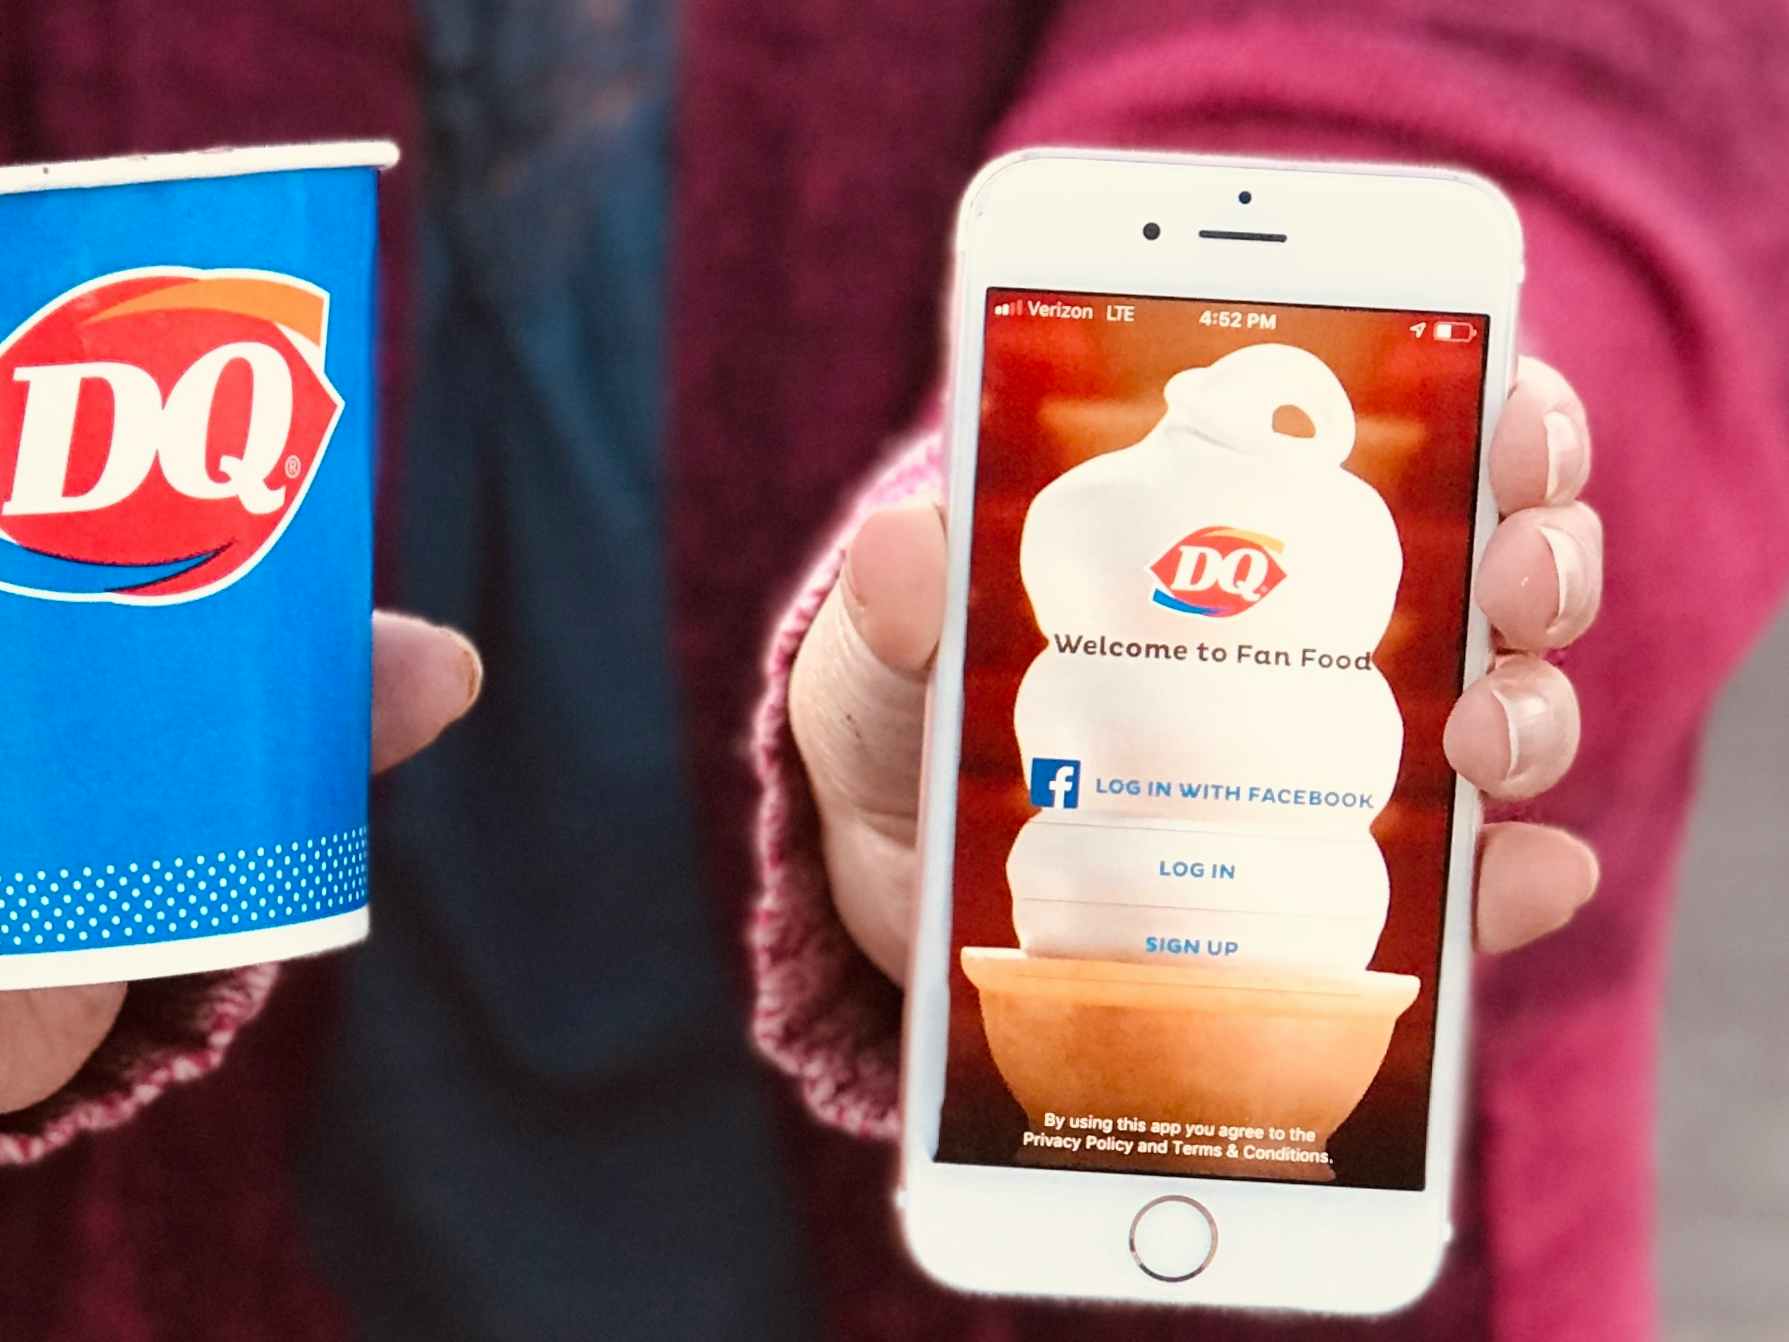 Download the Dairy Queen app for a free small blizzard.